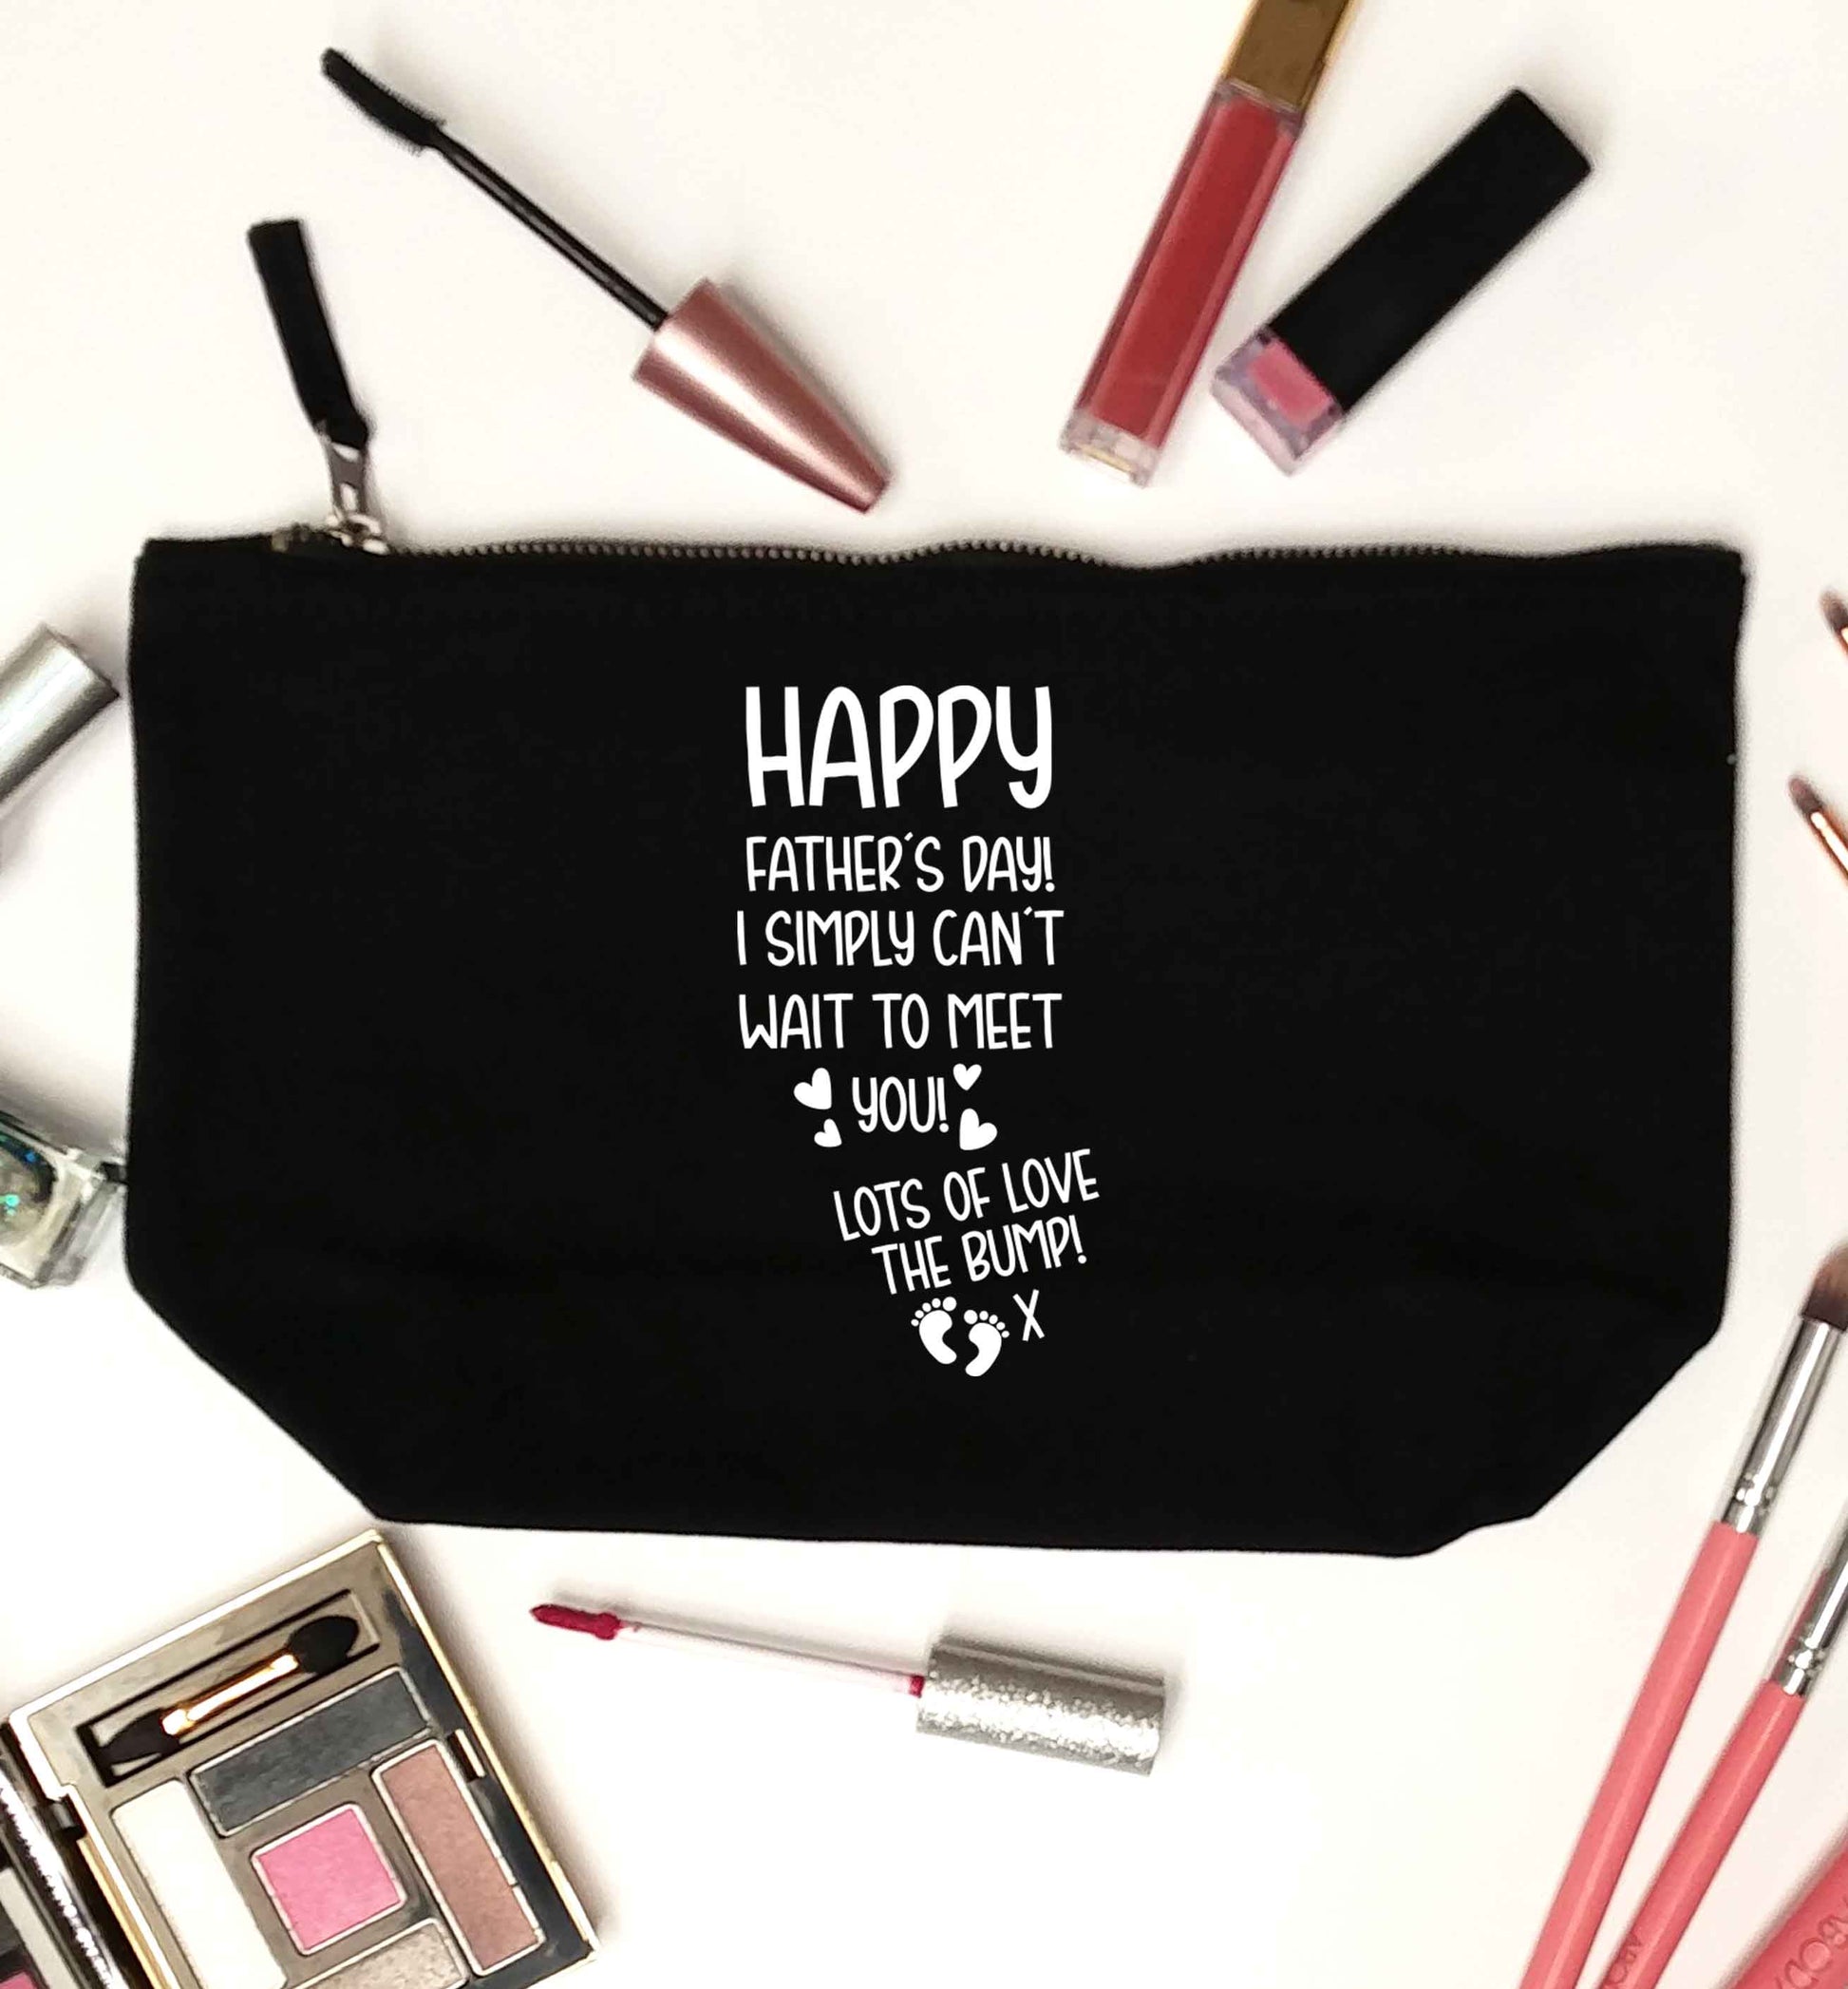 Happy Father's day daddy I can't wait to meet you lot's of love the bump! black makeup bag